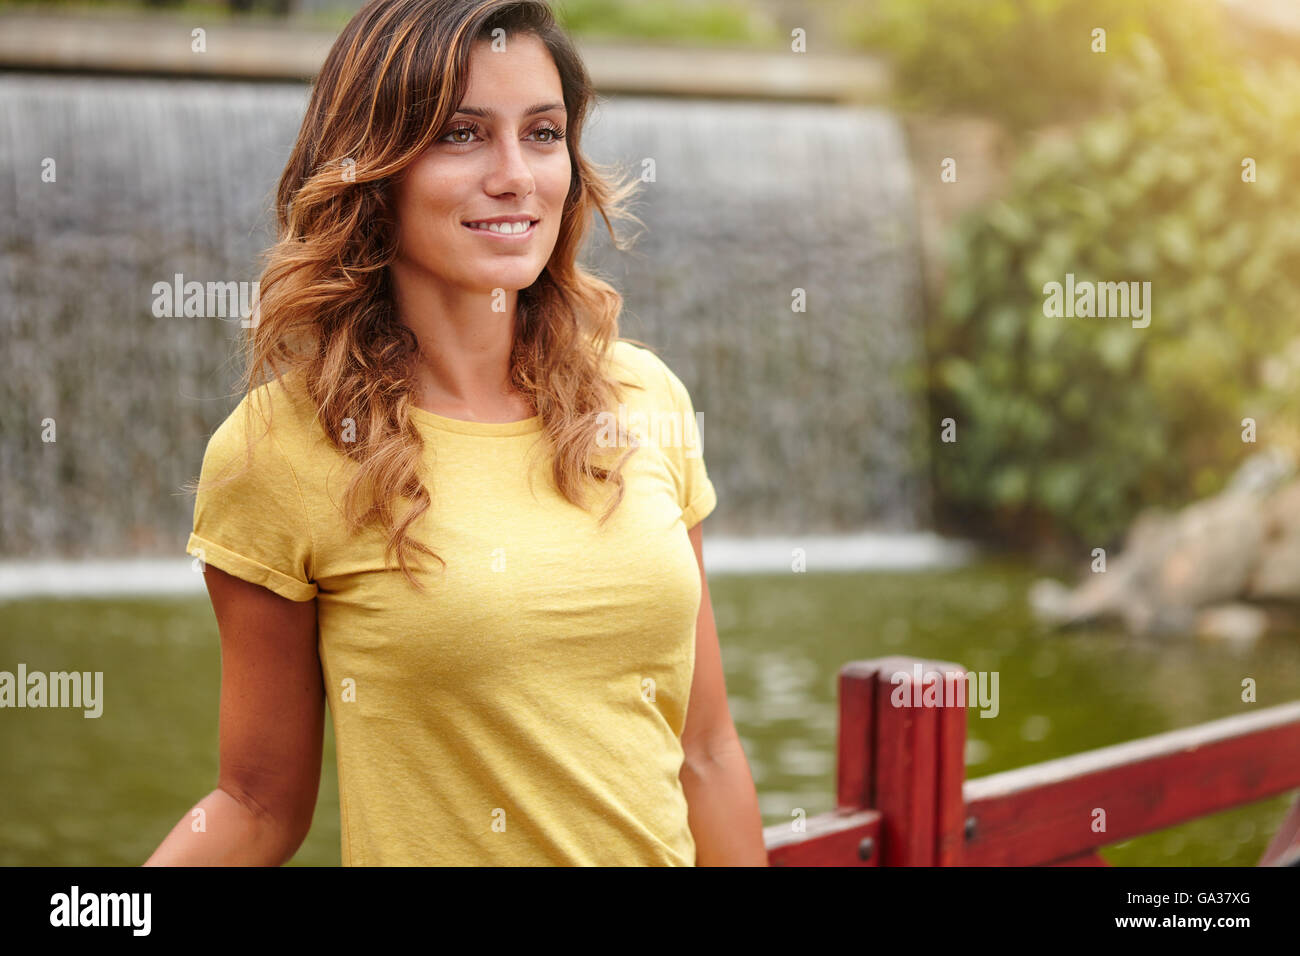 Young lady with medium-length hair smiling while standing near park lake Stock Photo